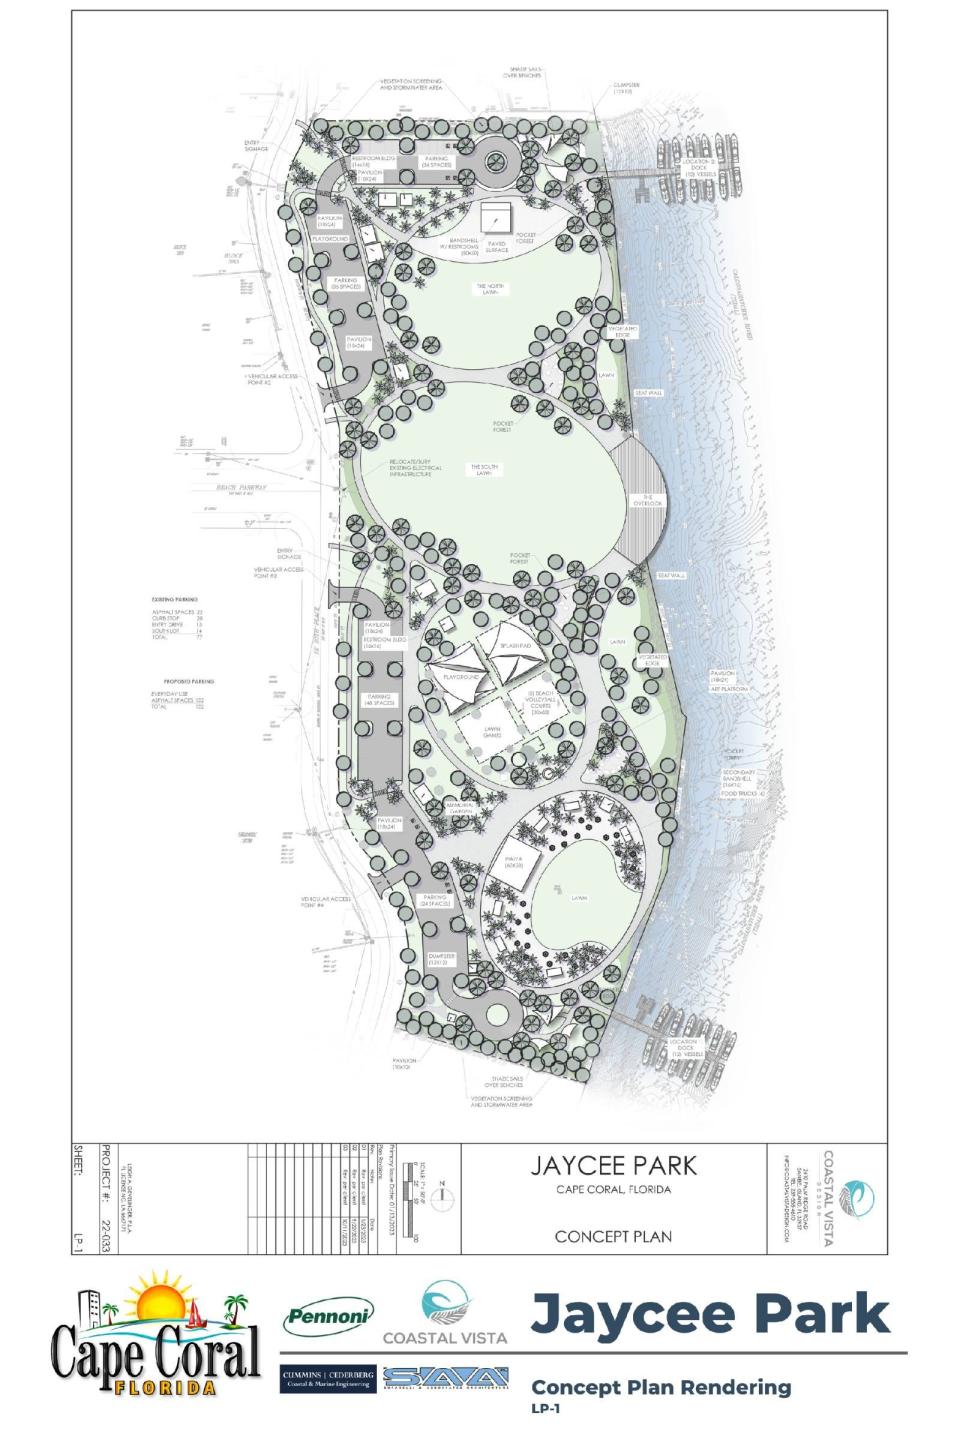 Jaycee Park has hit its 30% design benchmark, which includes a revised parking lot concept with 128 spaces, ADA boardwalk accessibility, more shade trees, and shaded seating options. To be presented to the public in March.